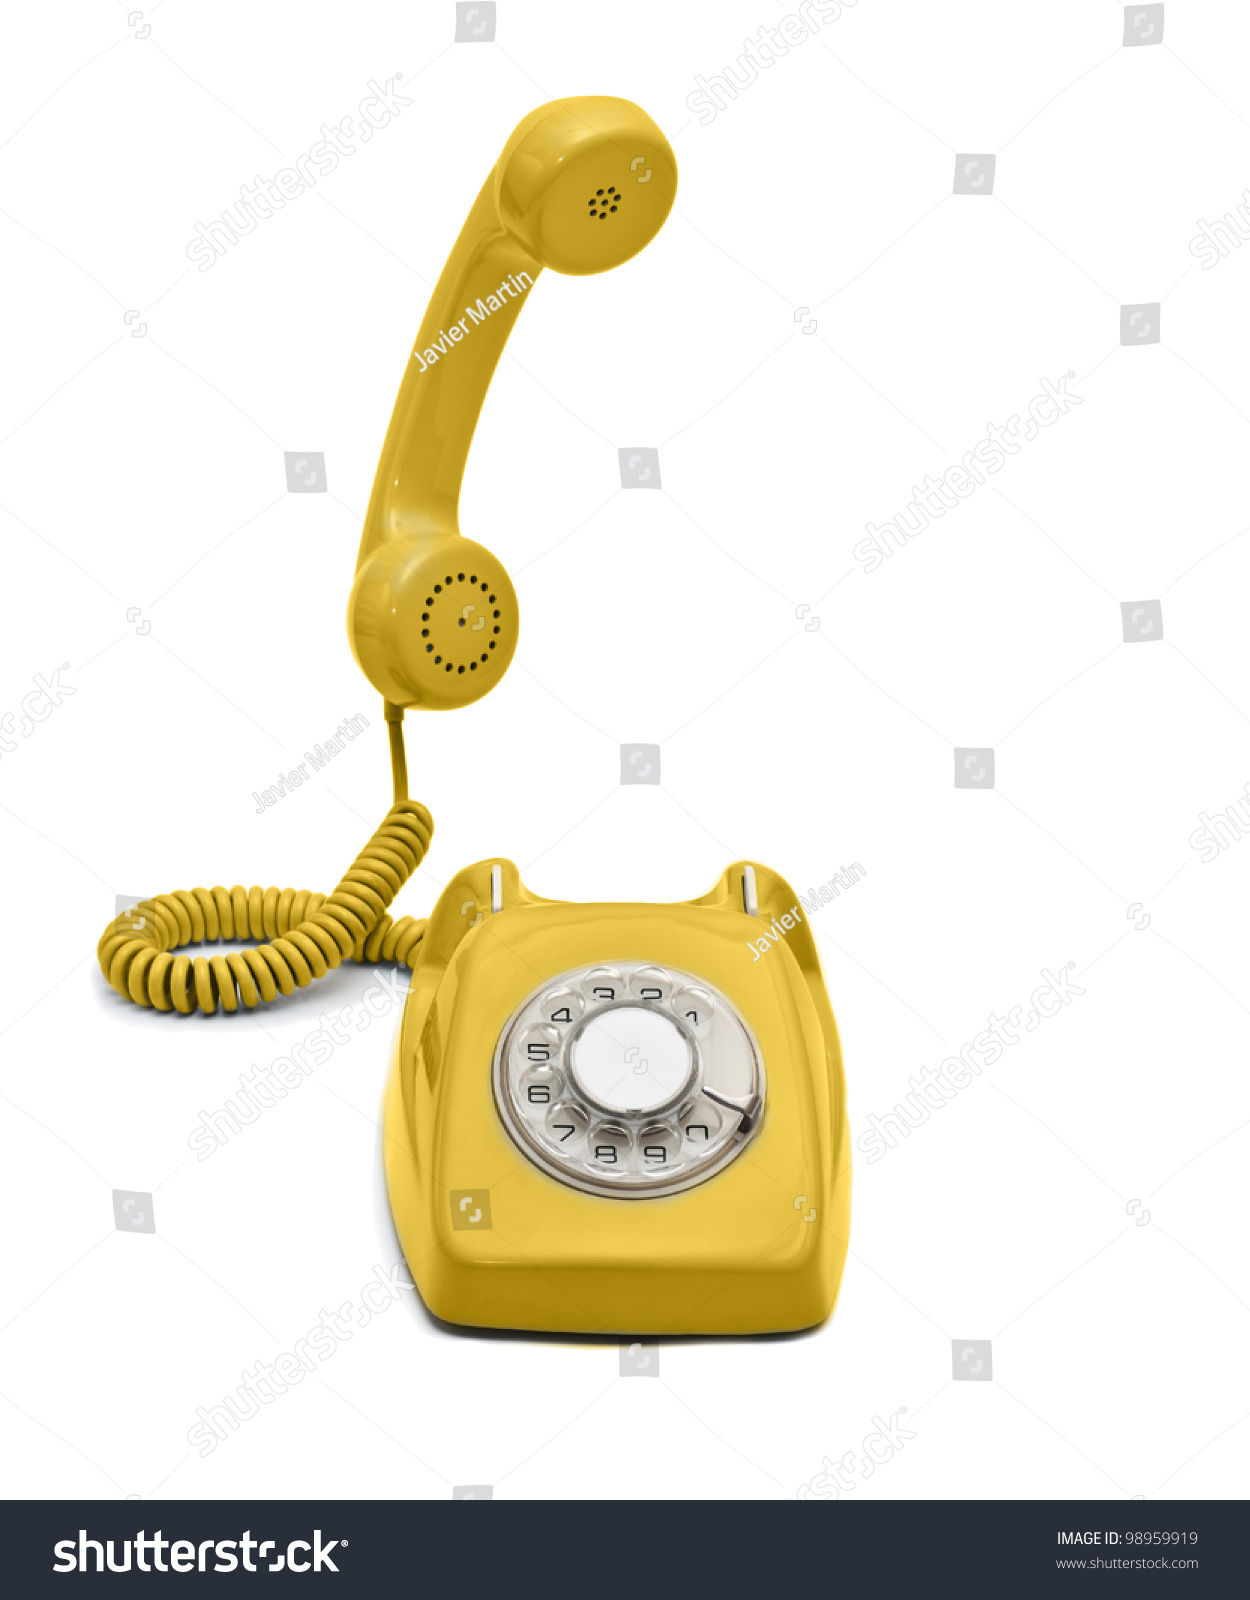 hook up old rotary phone